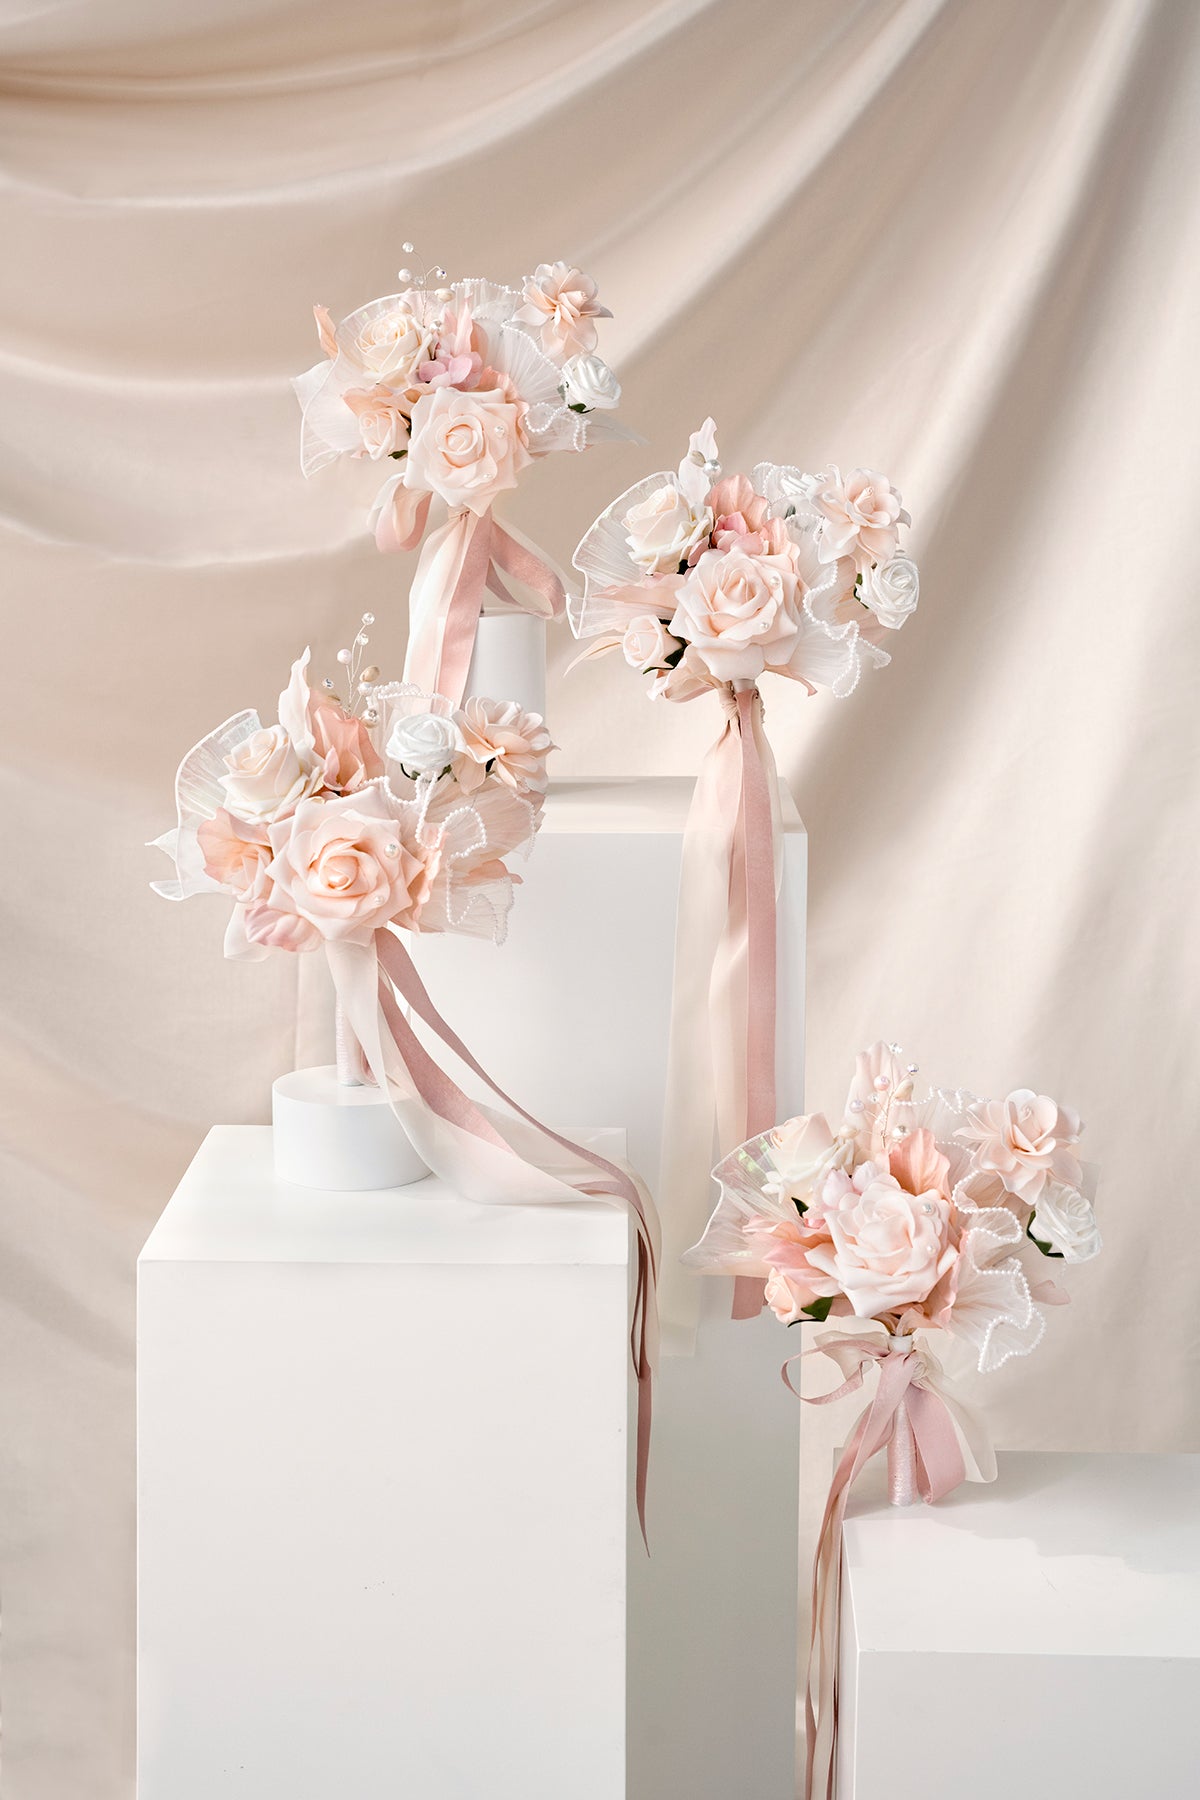 Free-Form Bridesmaid Bouquets in Glowing Blush & Pearl